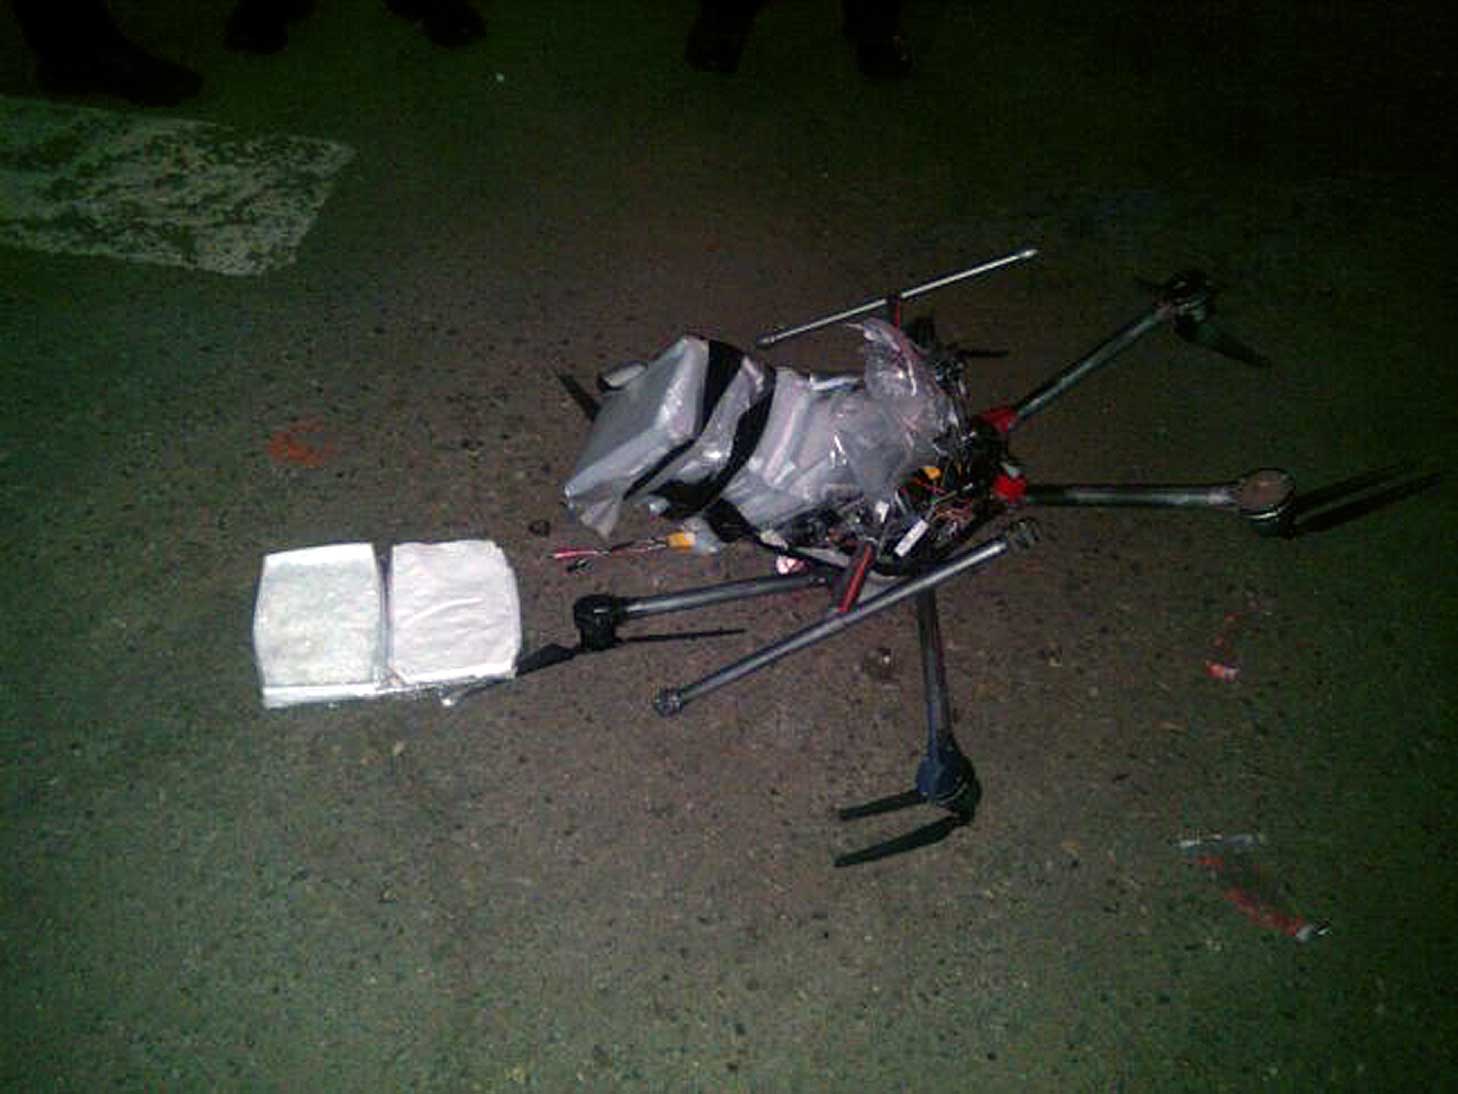 A drone loaded with packages containing methamphetamine lies on the ground after it crashed into a supermarket parking lot in the Mexican city of Tijuana on Jan. 20, 2015 (AP)